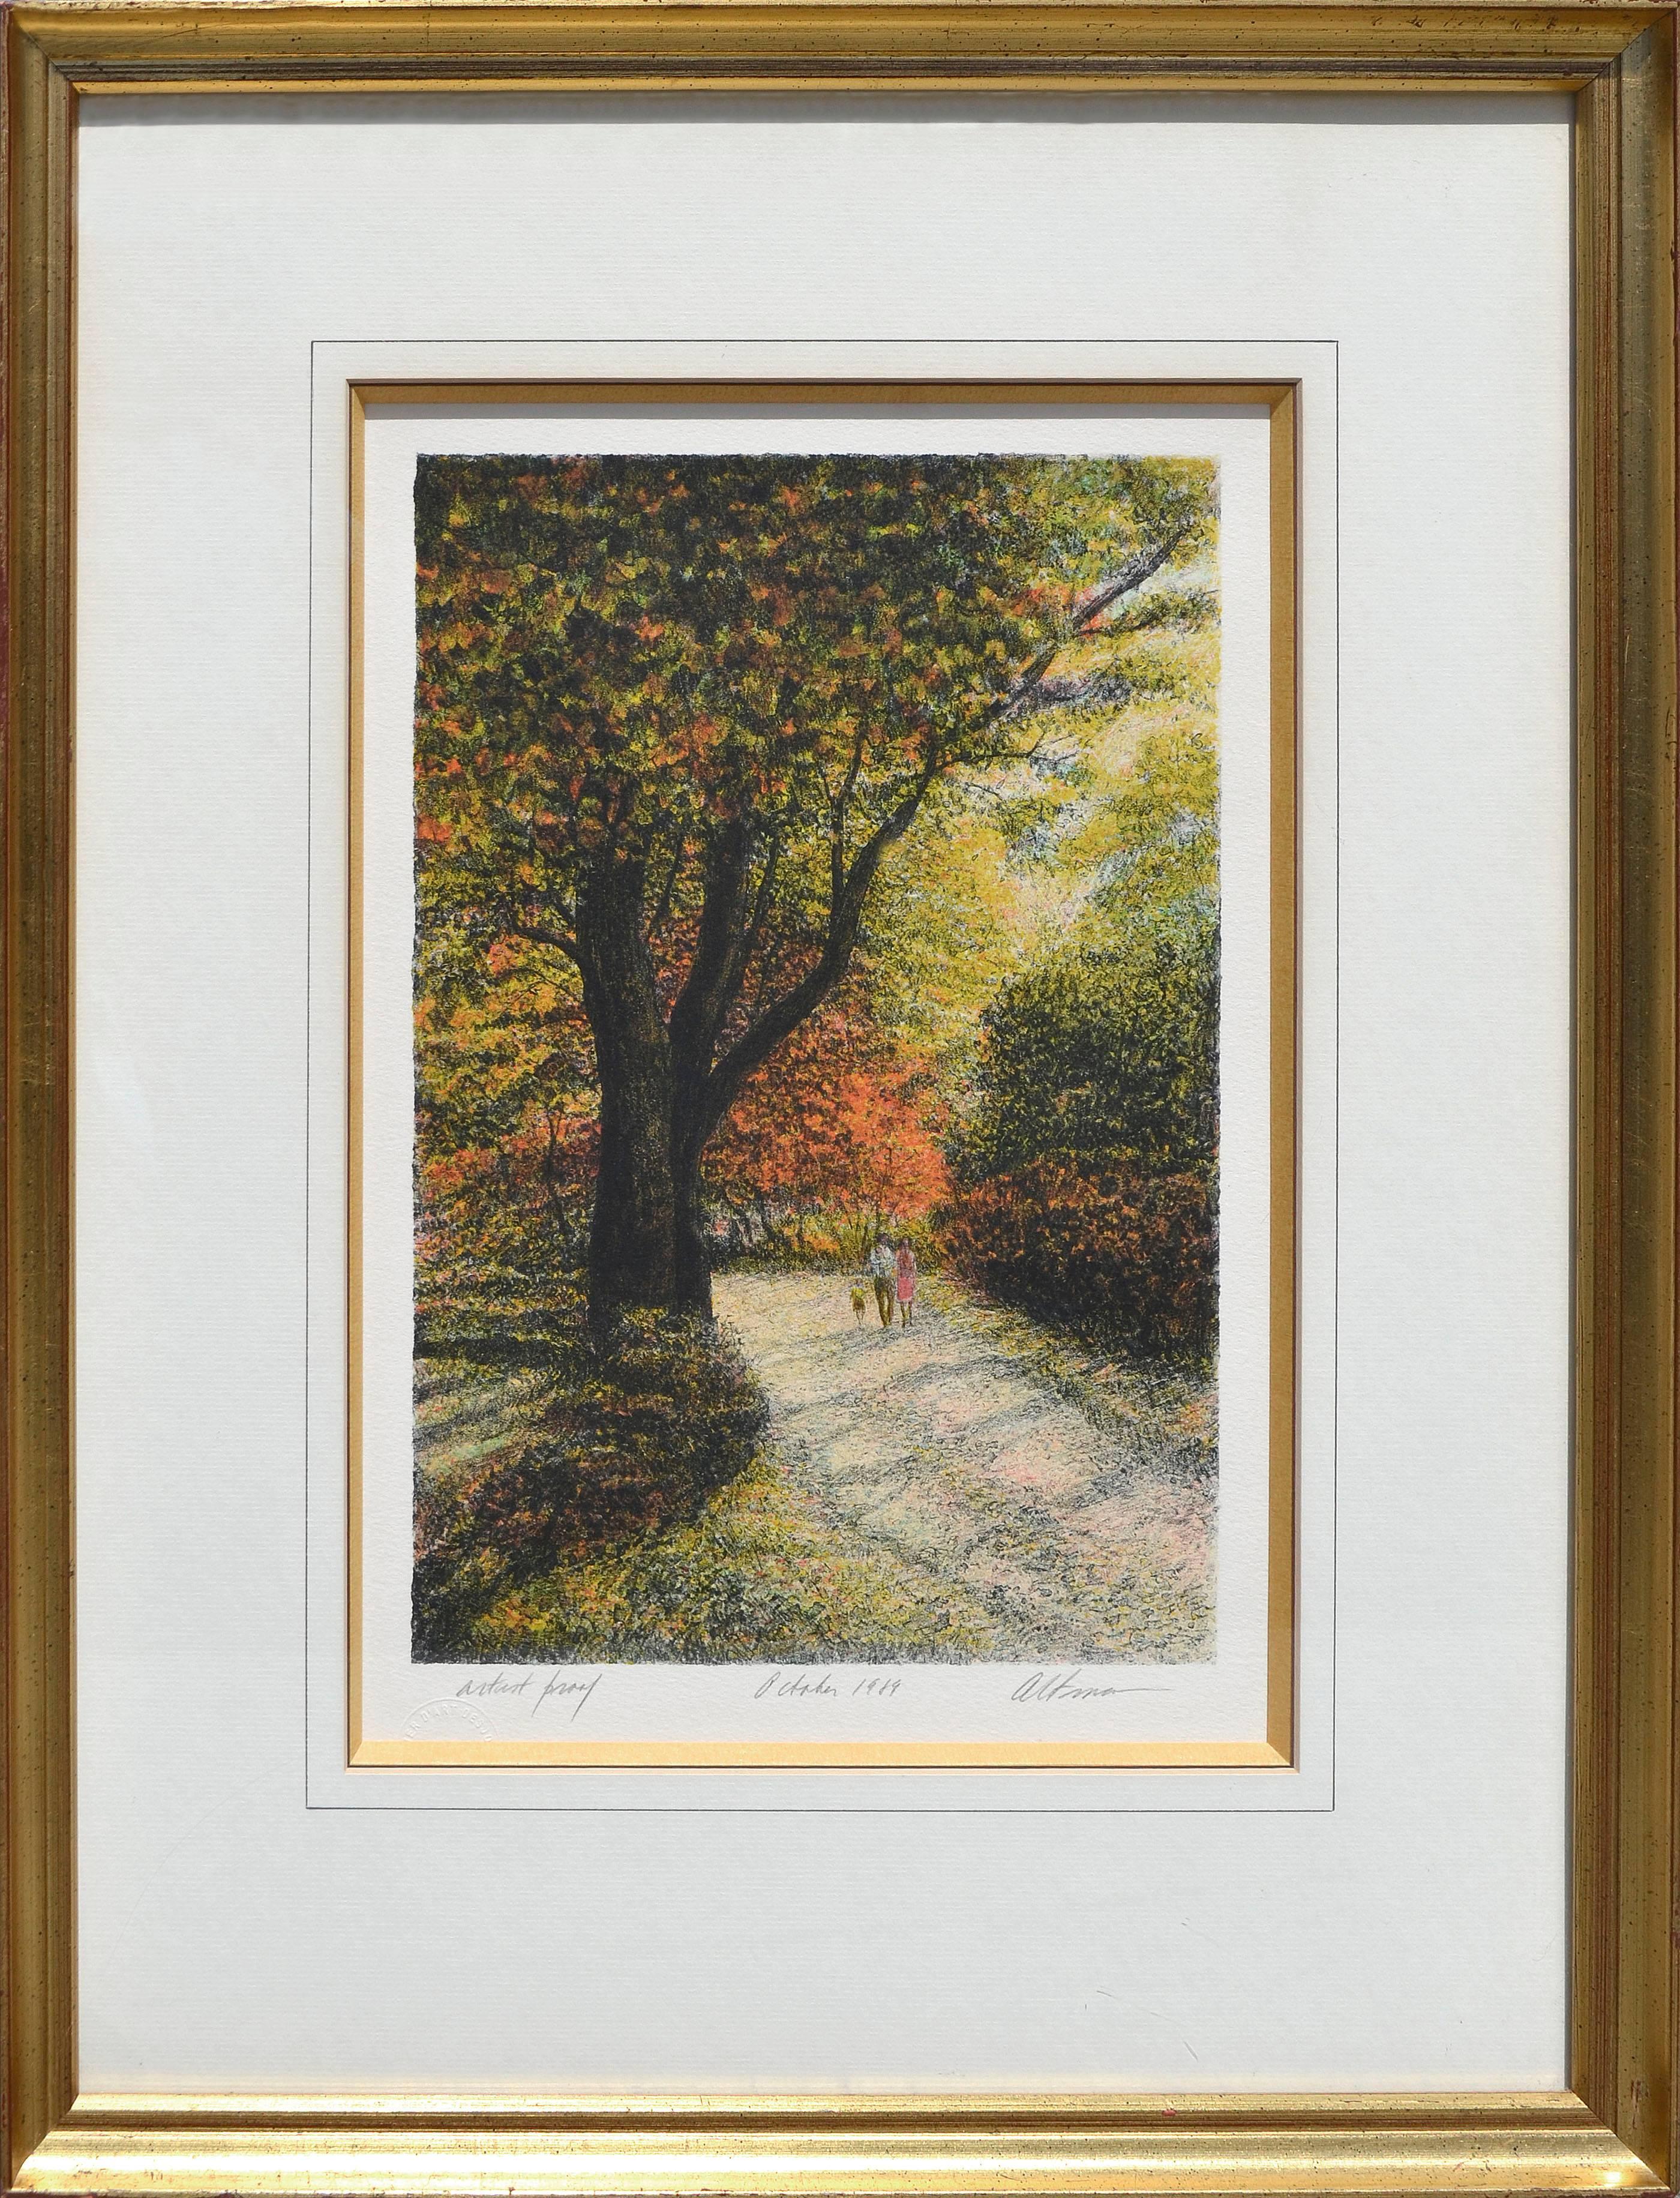 Harold Altman Figurative Print - Central Park in the Fall